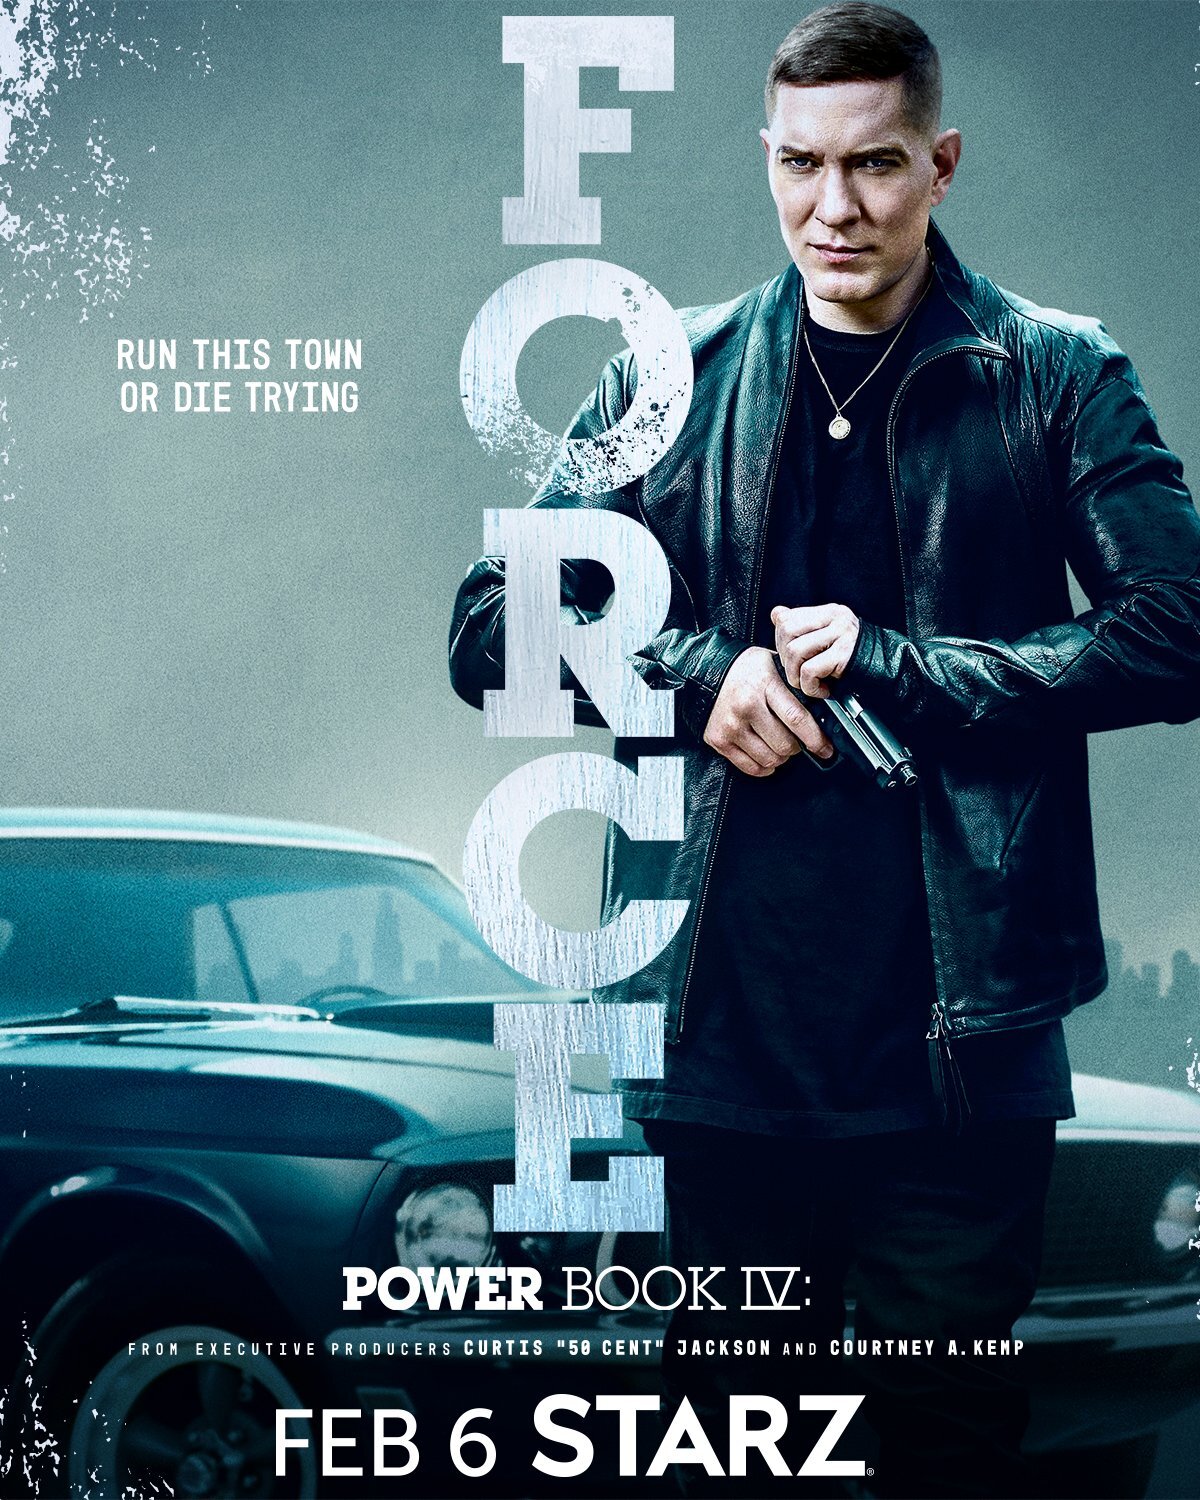 2 New Clips From Starz Original Series 'Power Book IV: Force' - Season 1, Episode 7